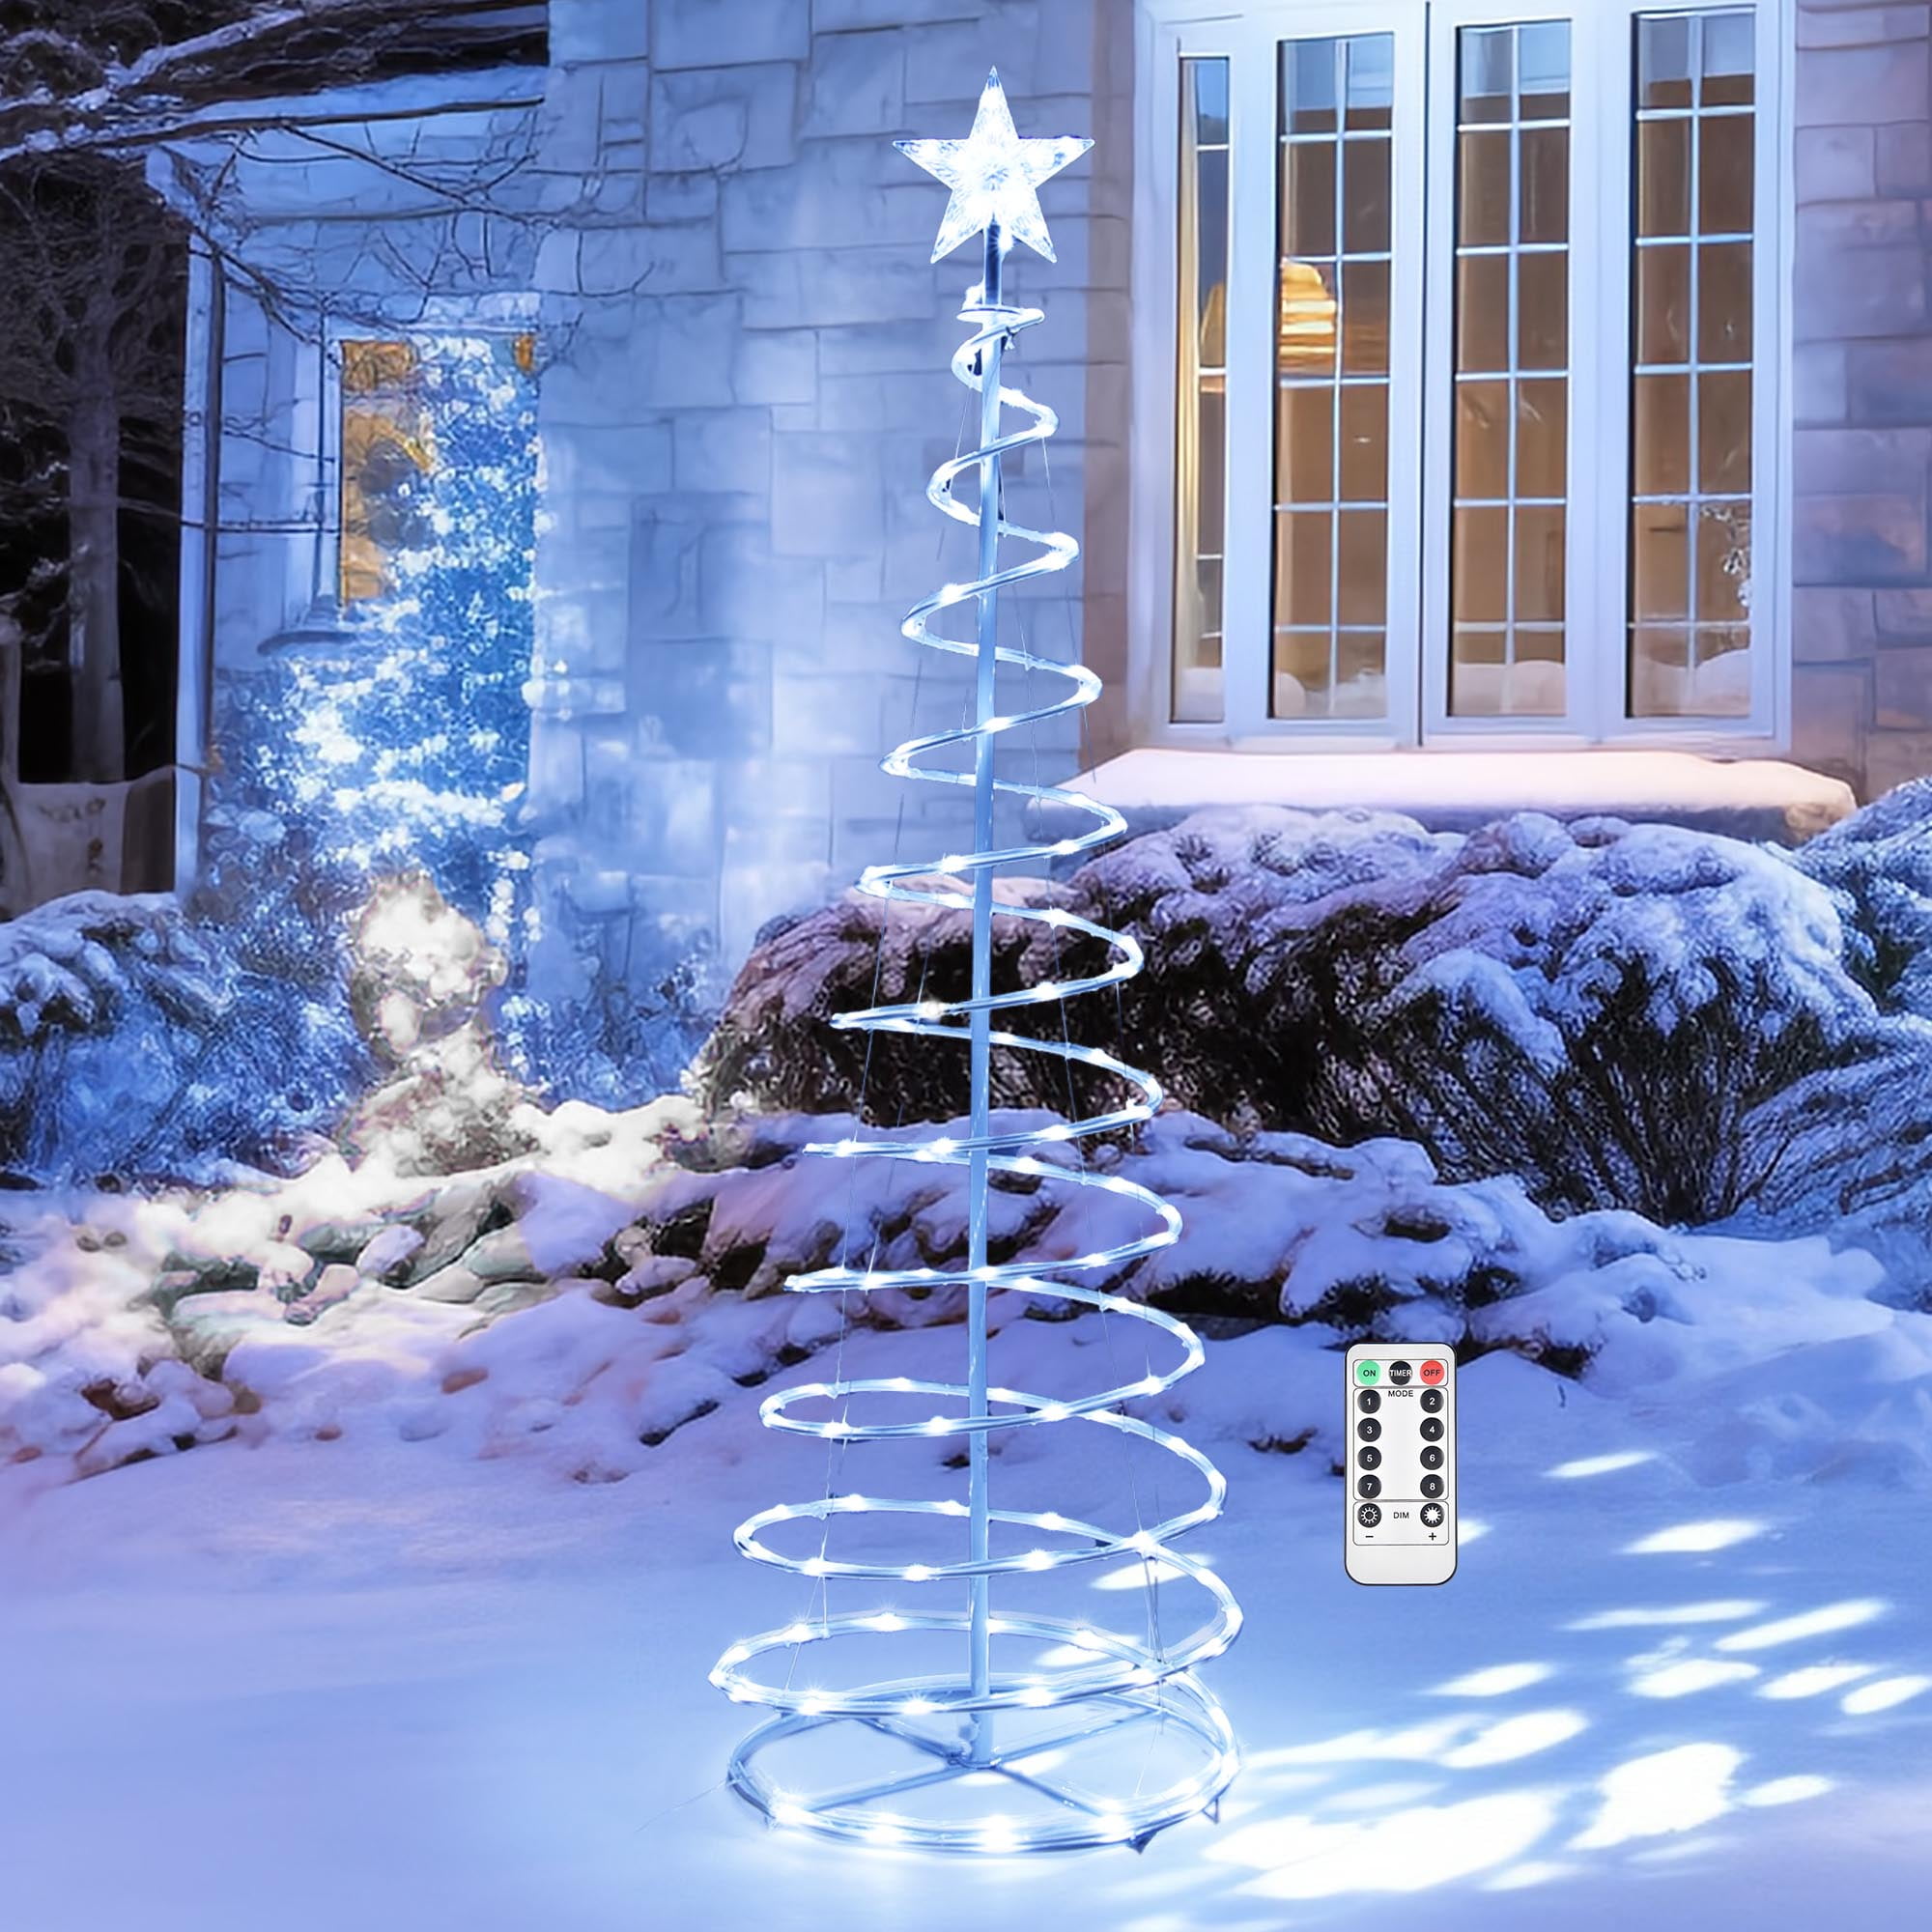 Prextex Christmas Lights (20 Feet, 100 Lights) - Clear White Christmas Tree  Lights with White Wire - Indoor/Outdoor Waterproof String Lights - Warm  White Twinkle Lights 